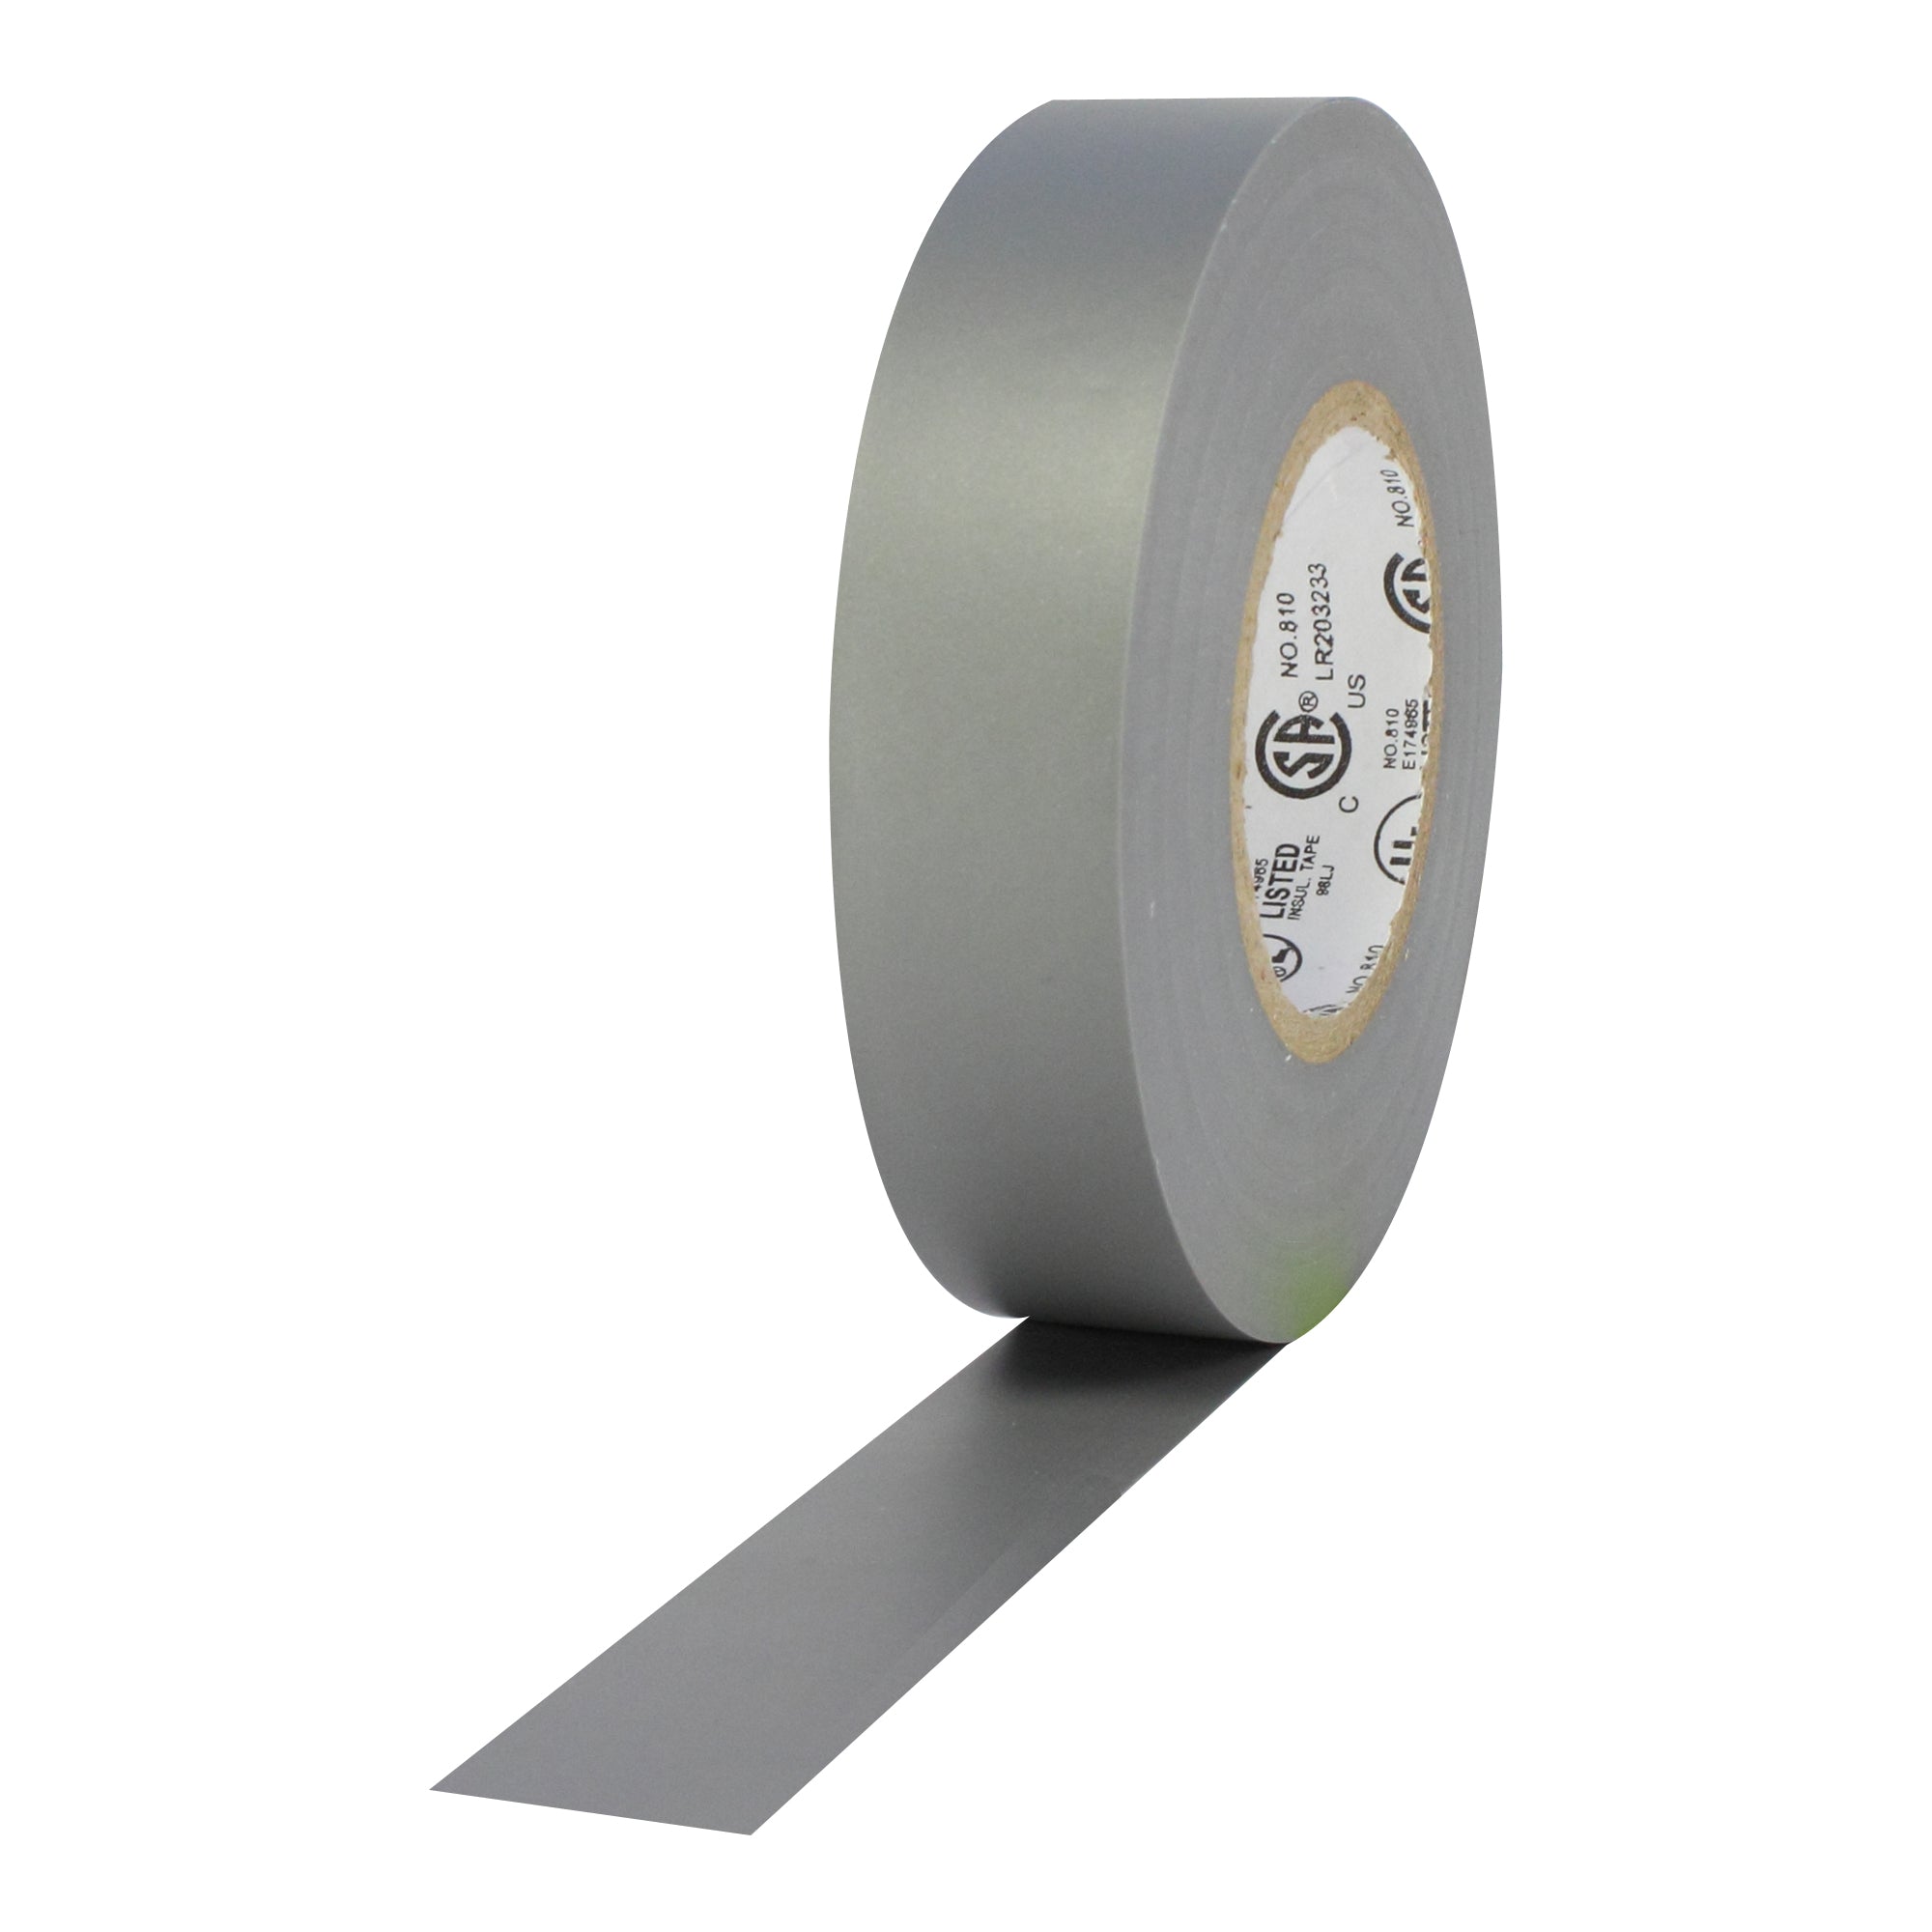 Pro Tapes Pro Plus Electrical Tape - 3/4" x 60', Gray